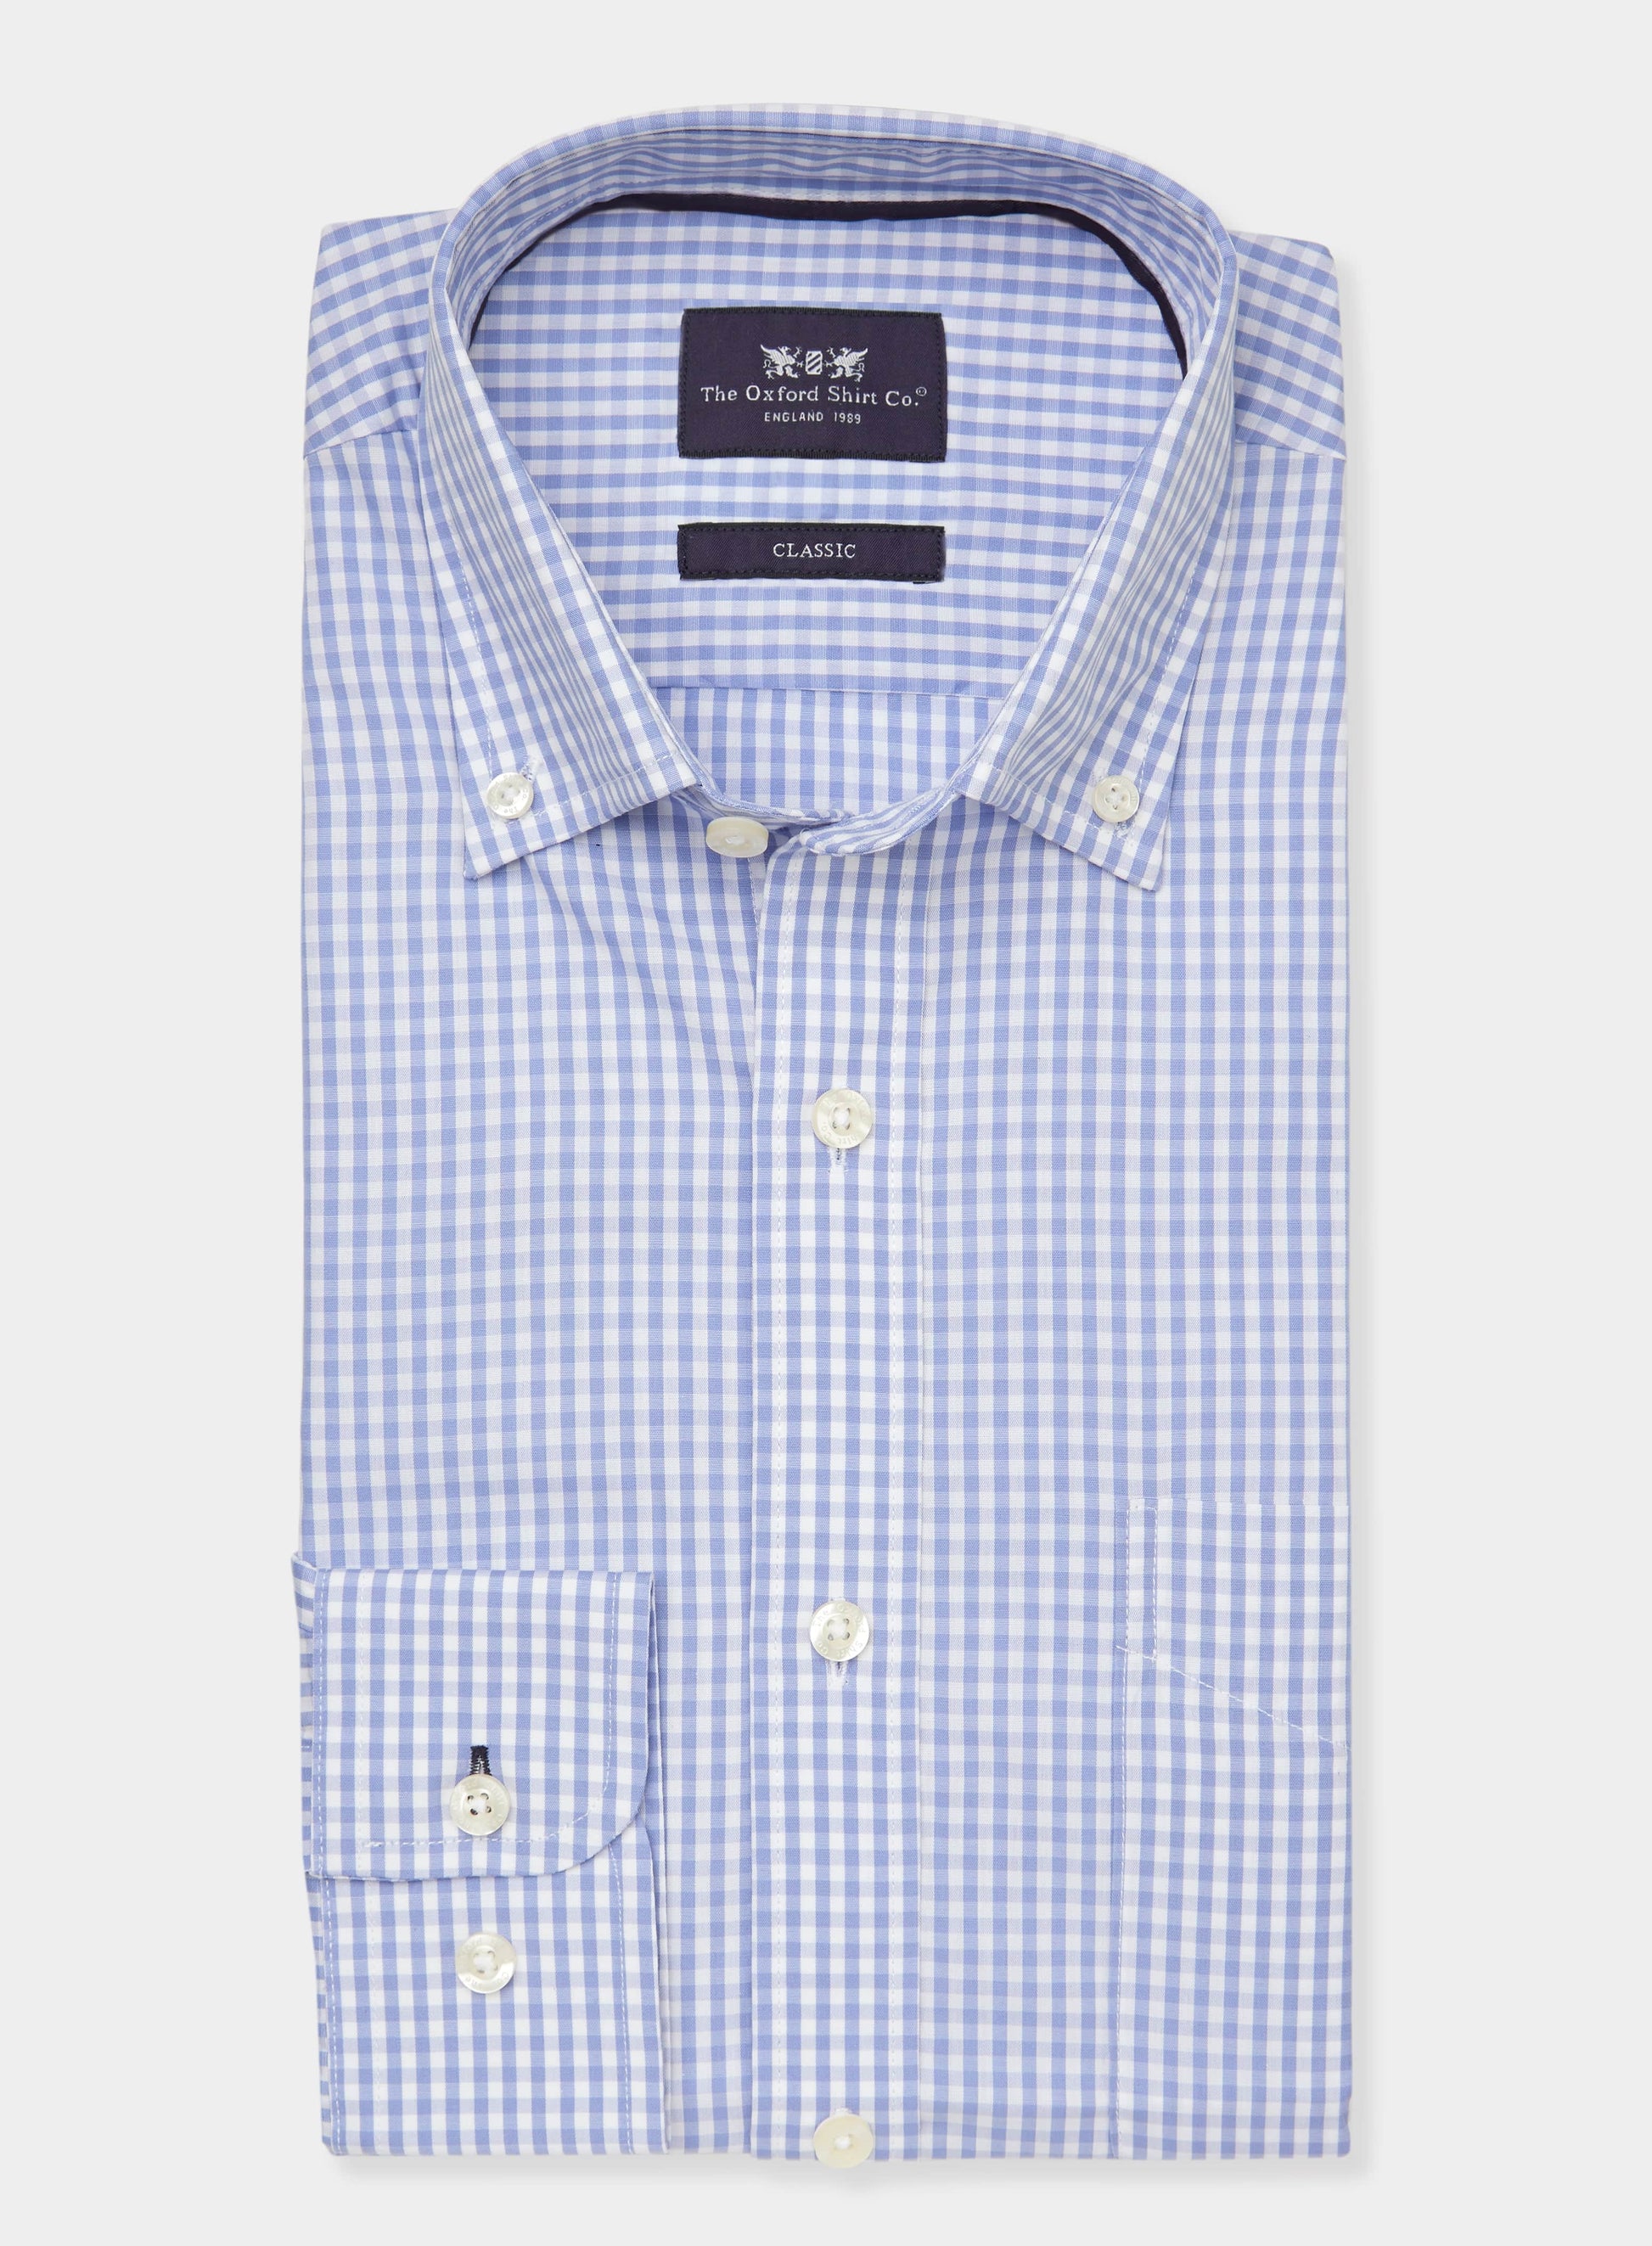 Button Down Shirt in Pale Blue Gingham